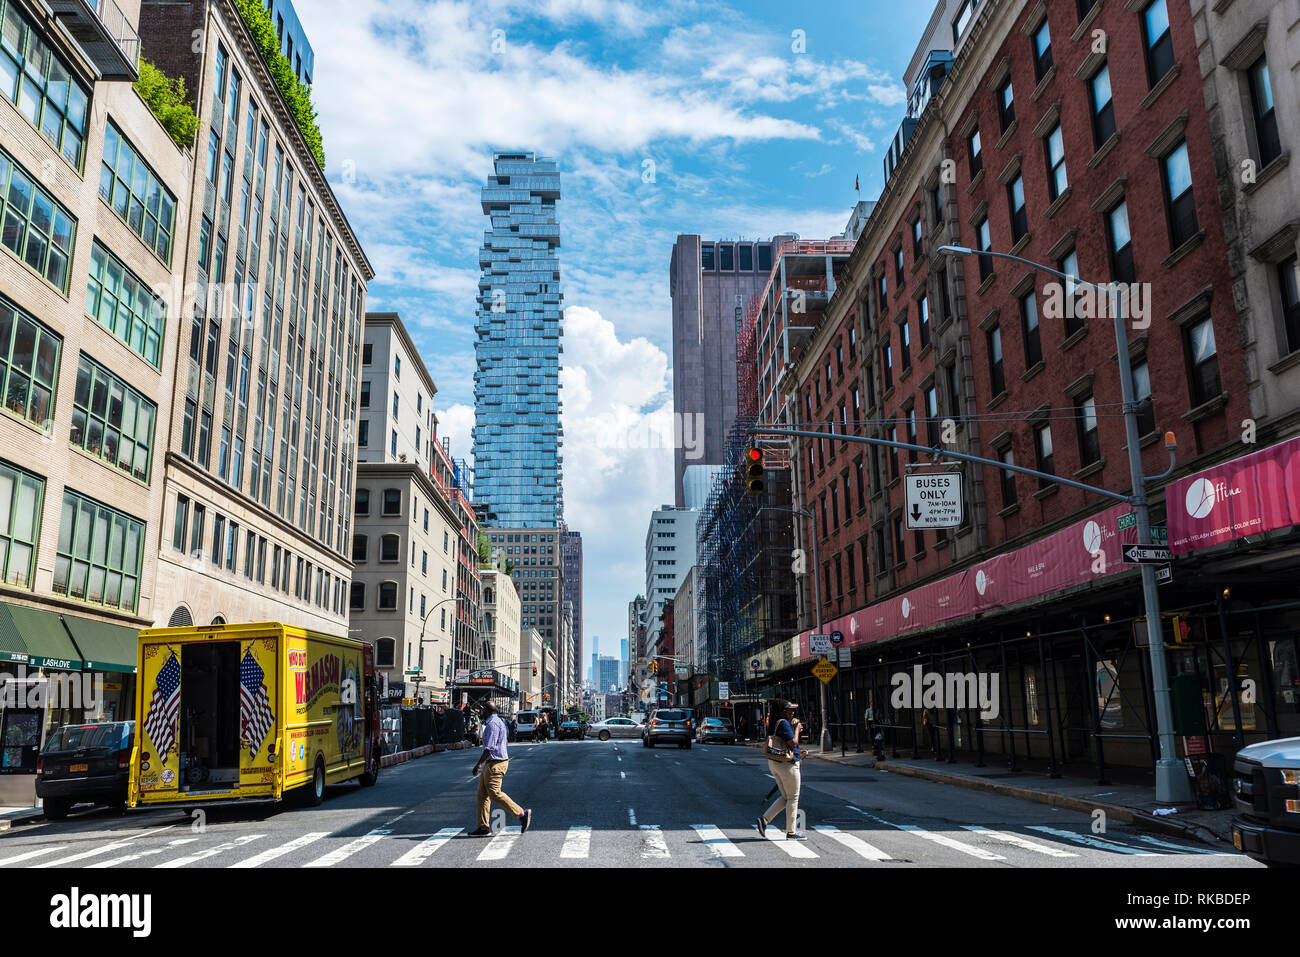 New York City, USA - July 27, 2018: Facade of a modern skyscraper in 56 Leonard Street, also known as Jenga Building, seen from Harlem with traffic an Stock Photo